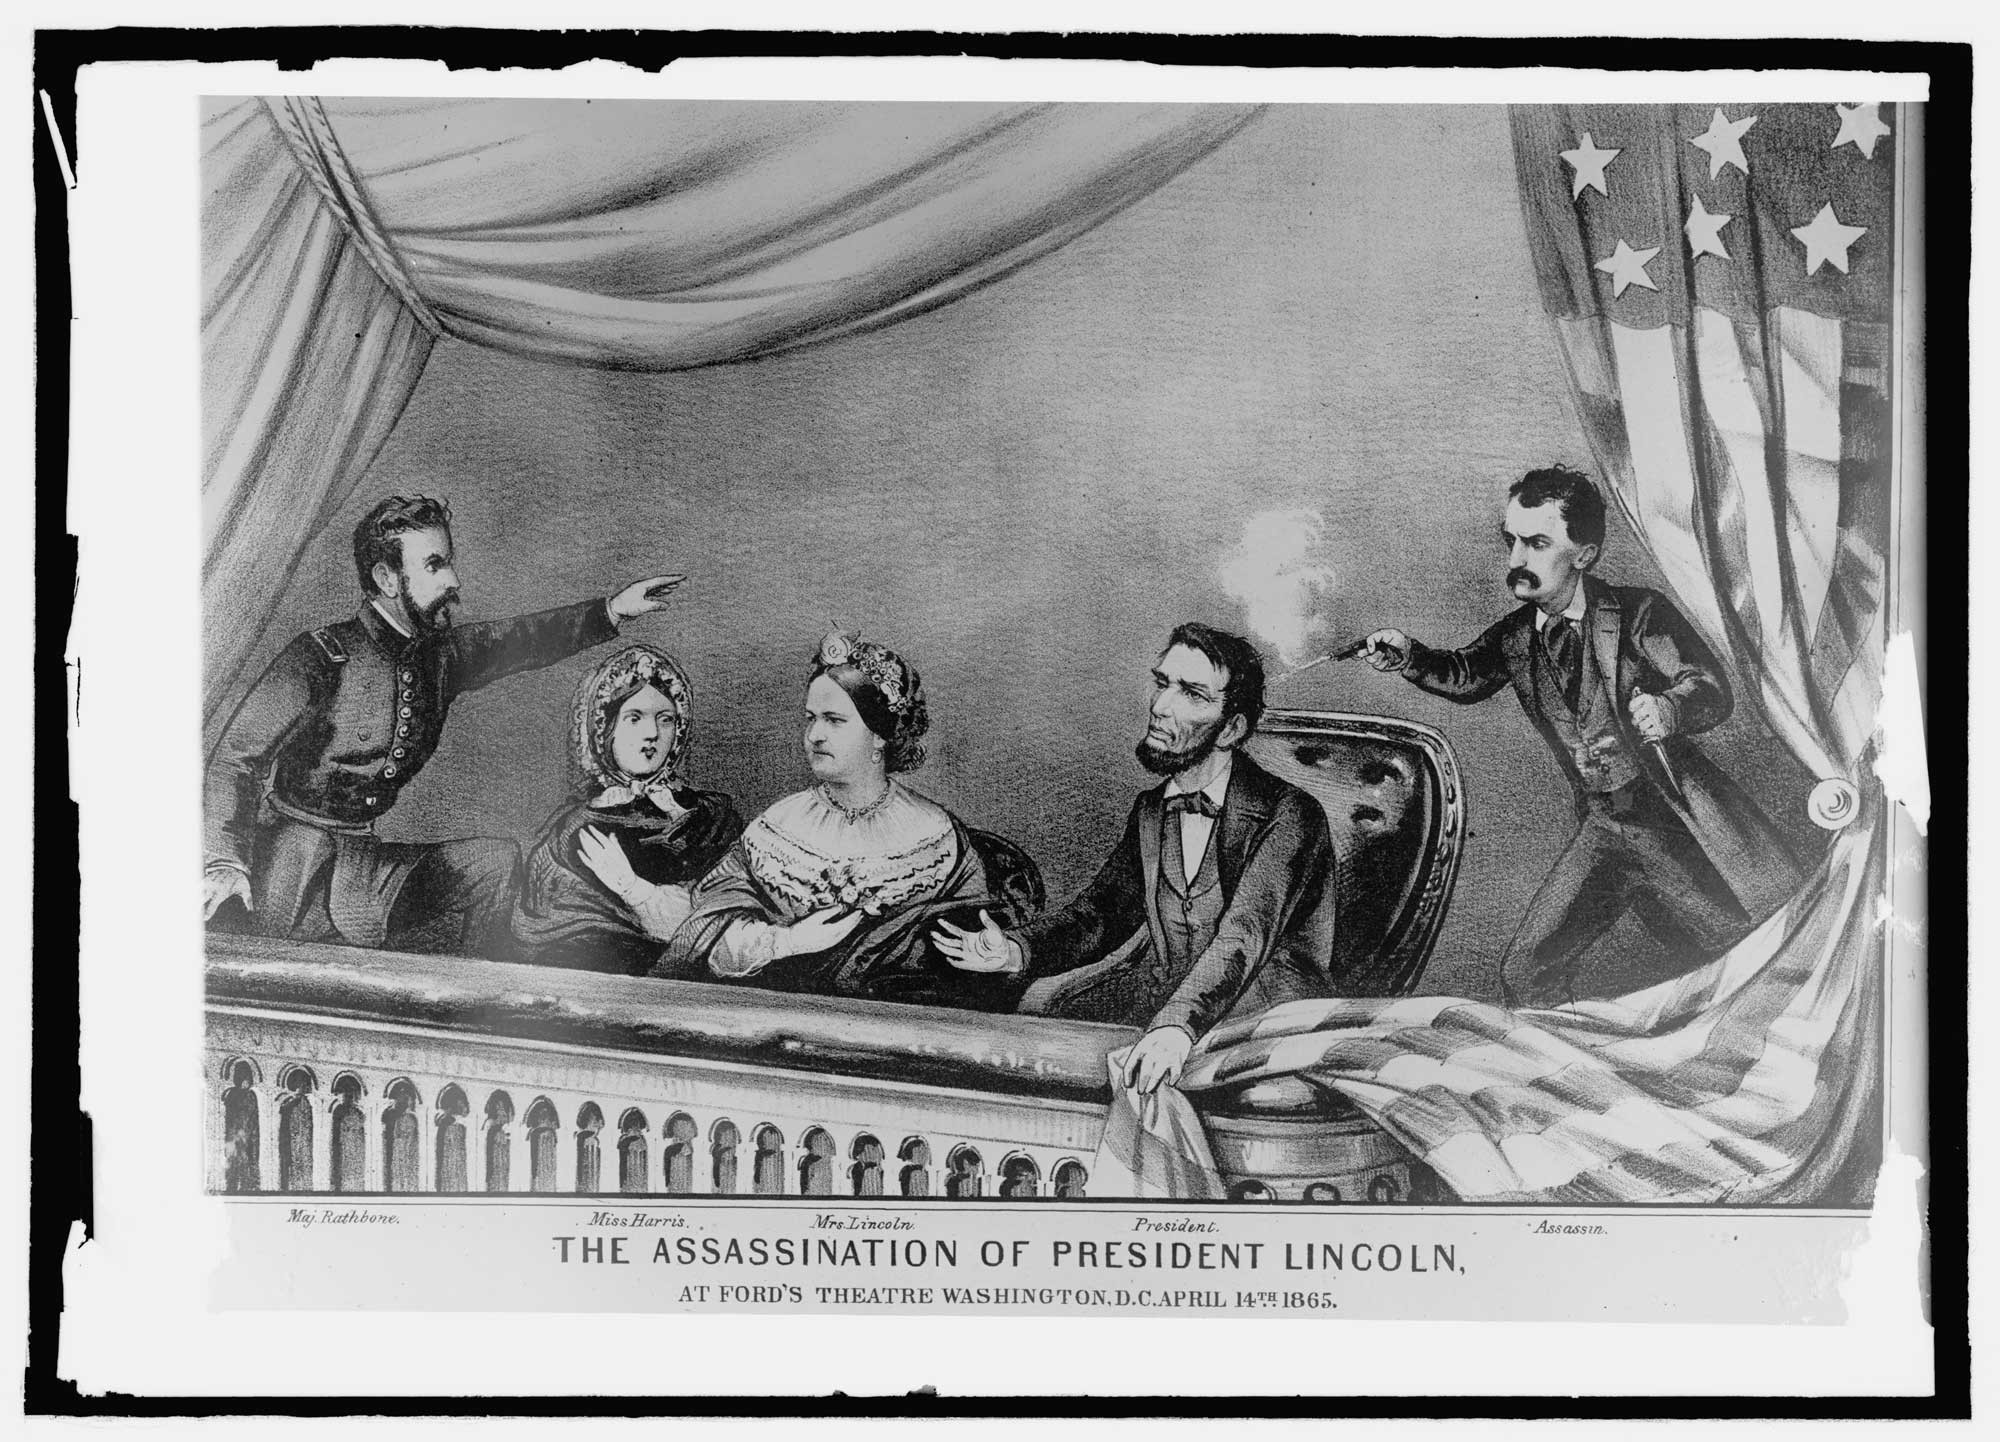 A pencil drawing of the assassination of Abraham Lincoln by John Wilkes Booth.